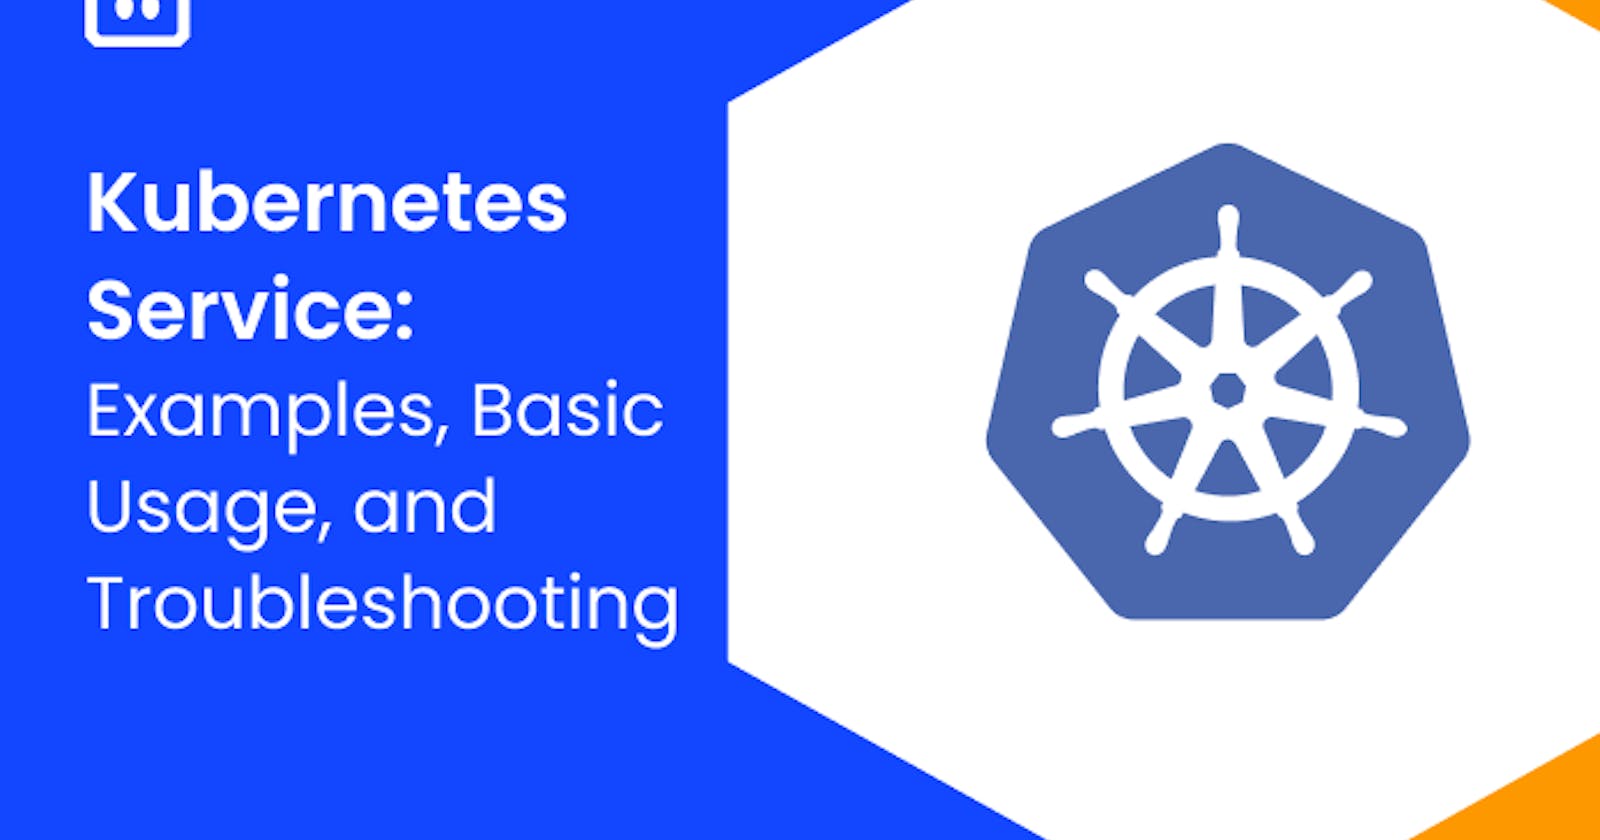 What are Kubernetes Services?